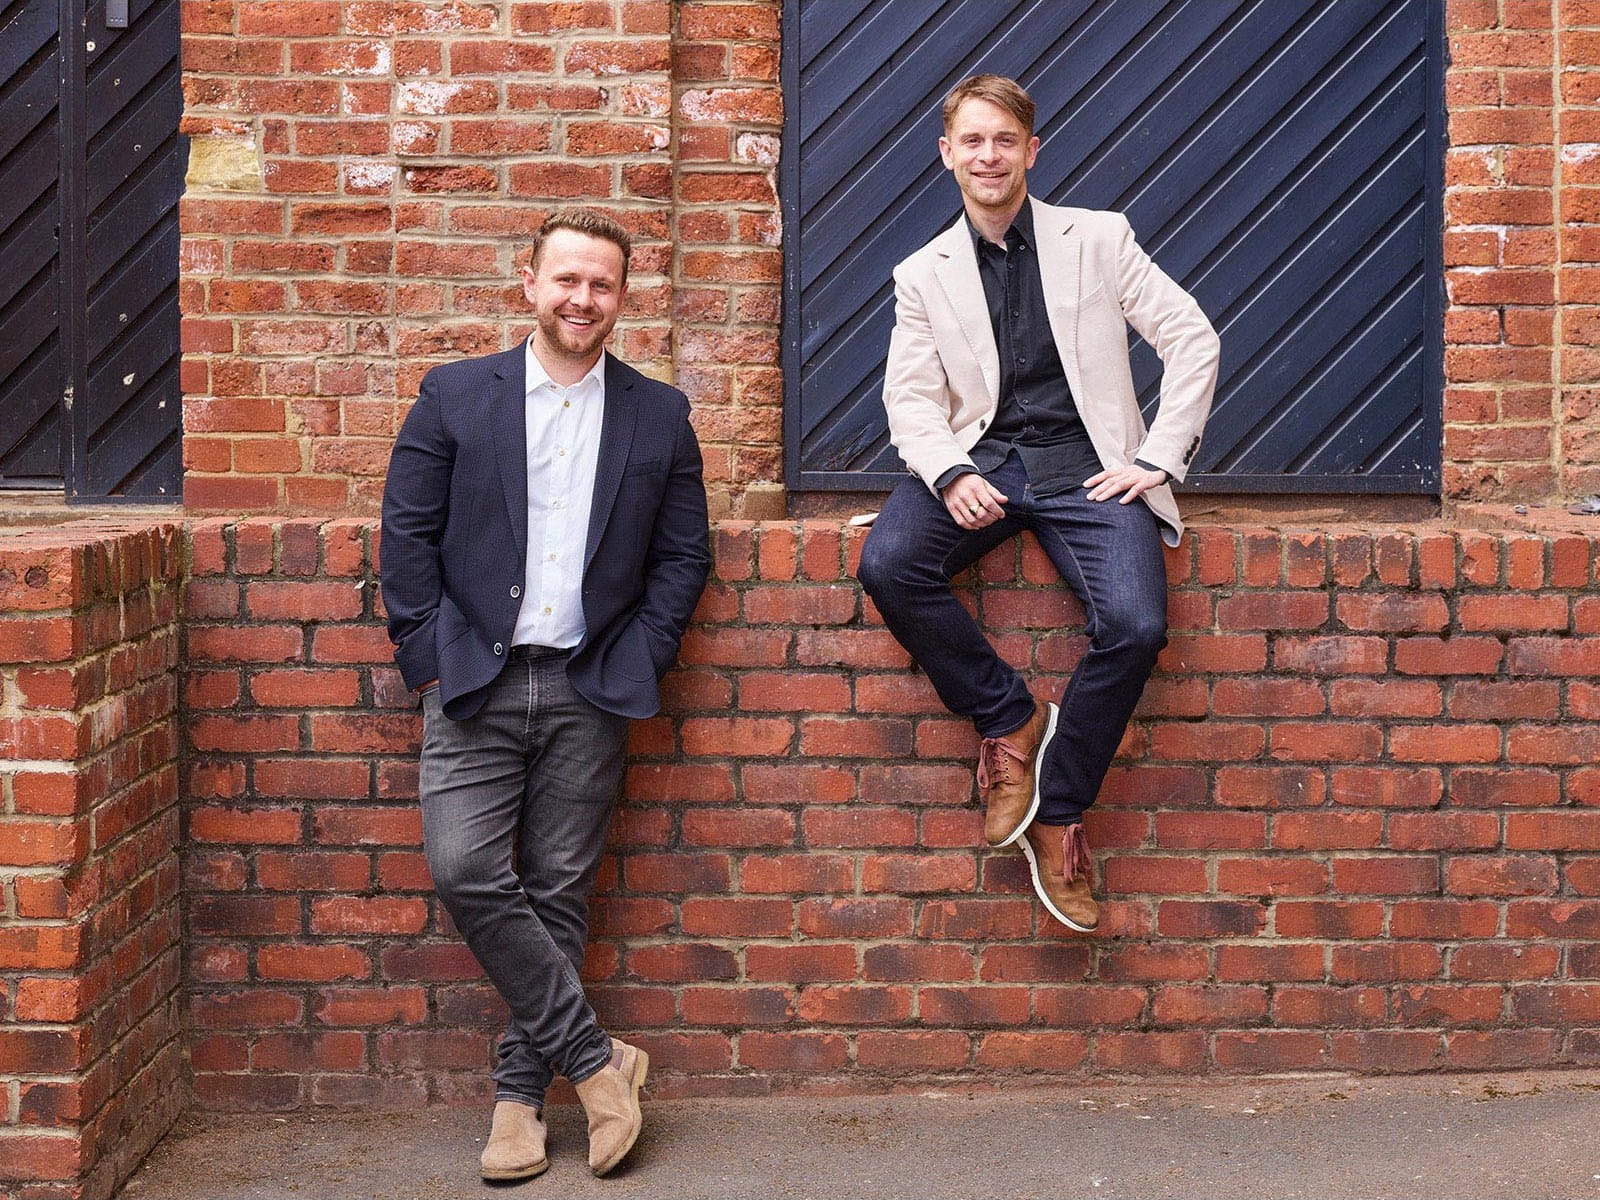 brothers Nick and Tom Watkins Might owners start up alternative dairy products